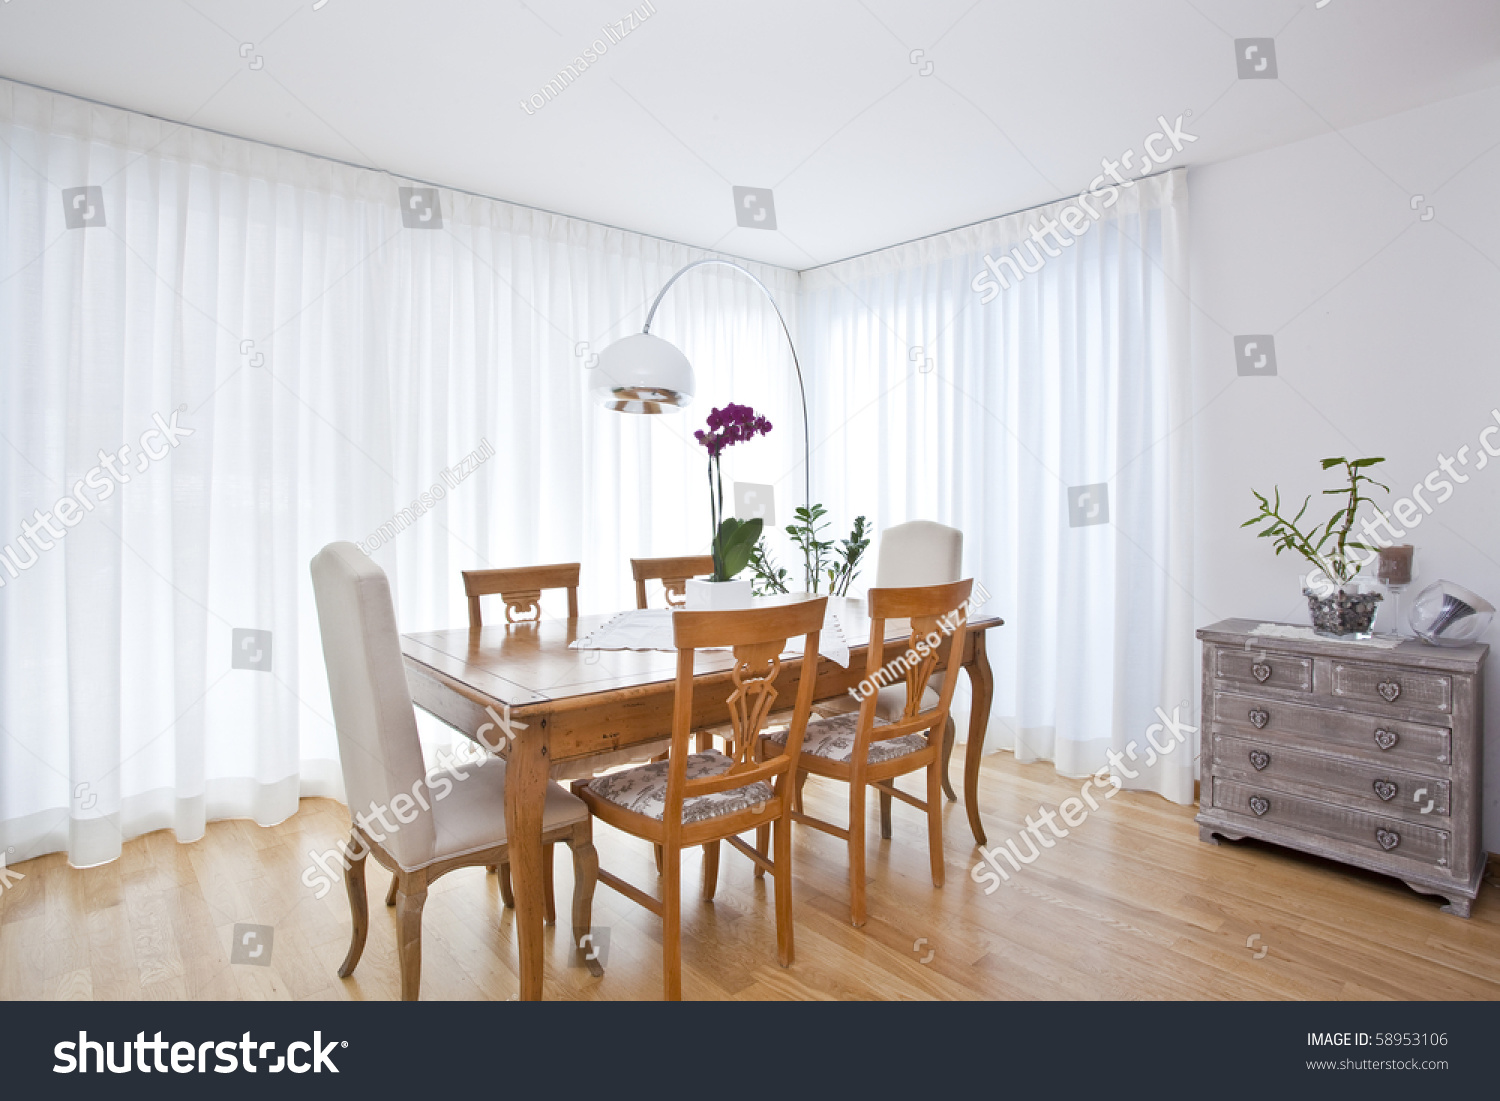 white curtains in dining room